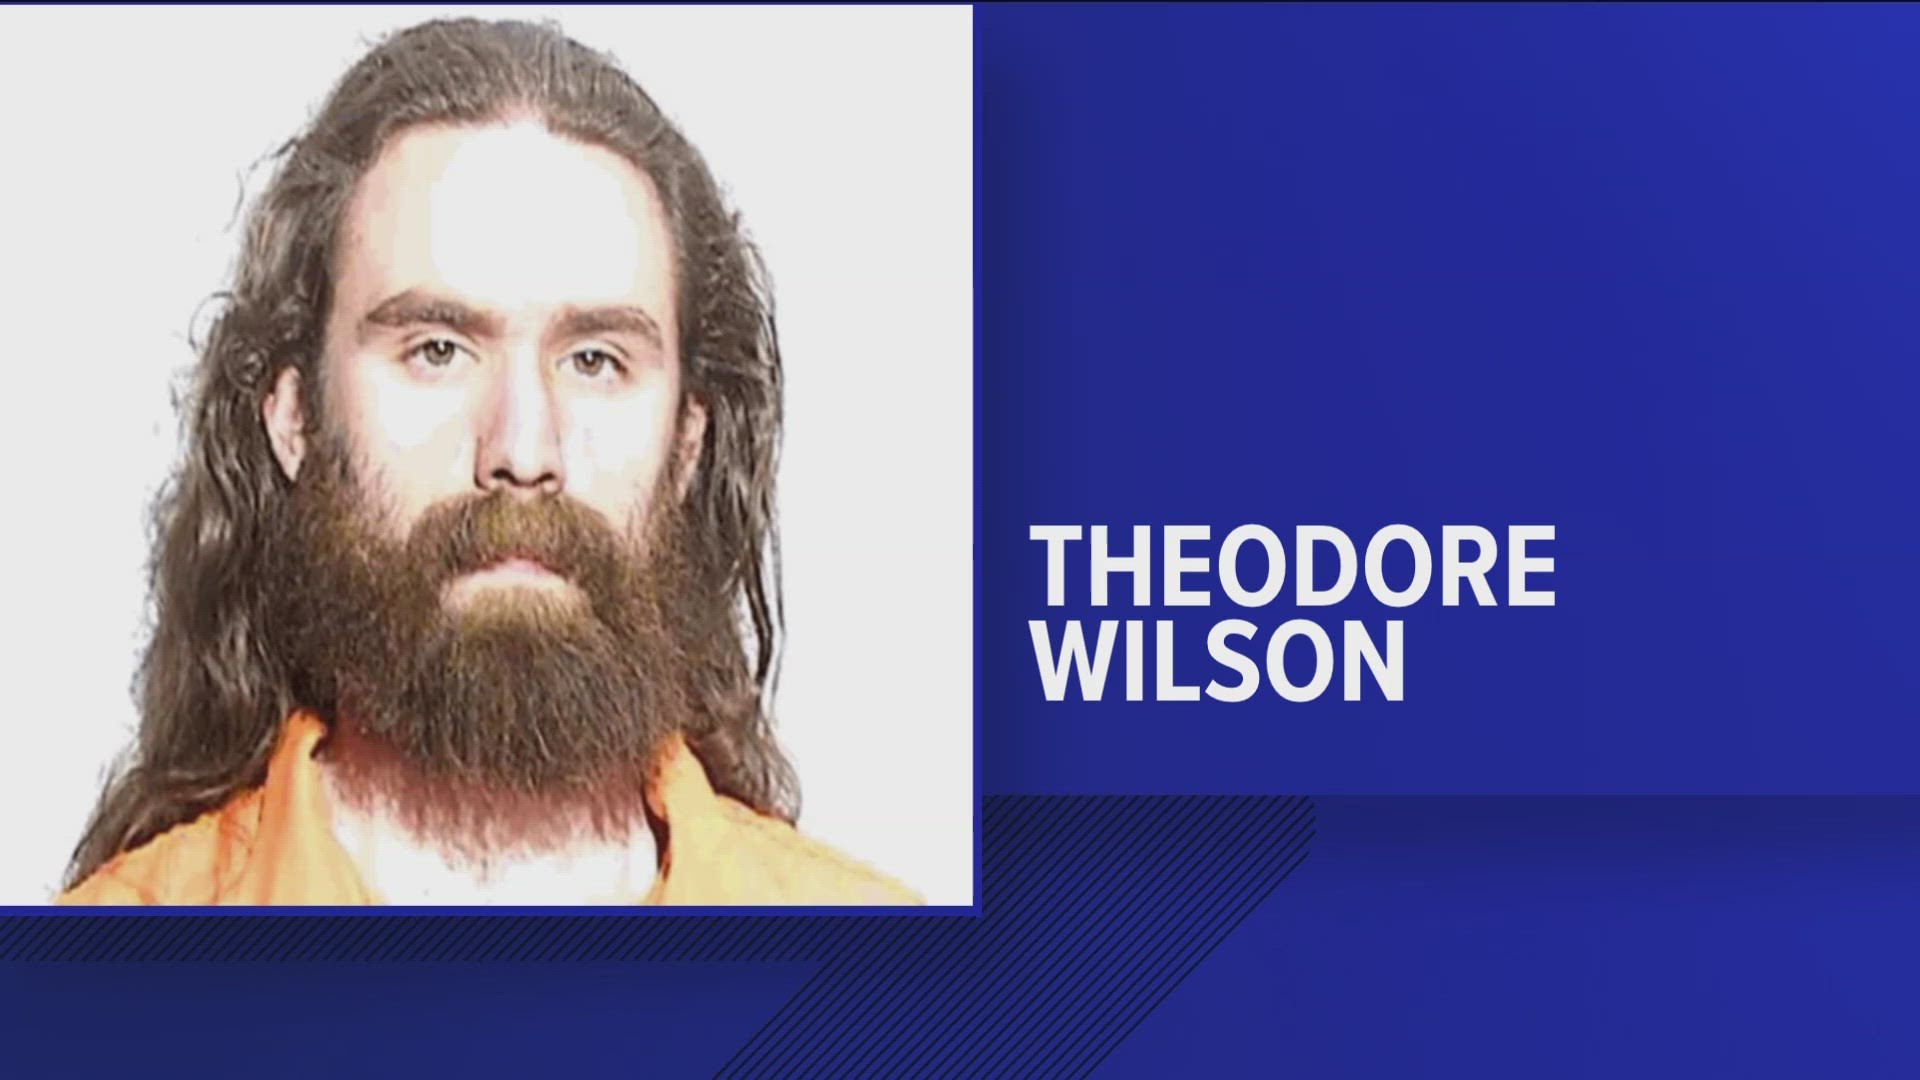 Theodore Wilson, 24, was arrested Tuesday "for his involvement in a string of lewd and illegal activity across Lucas County," Whitehouse police said.